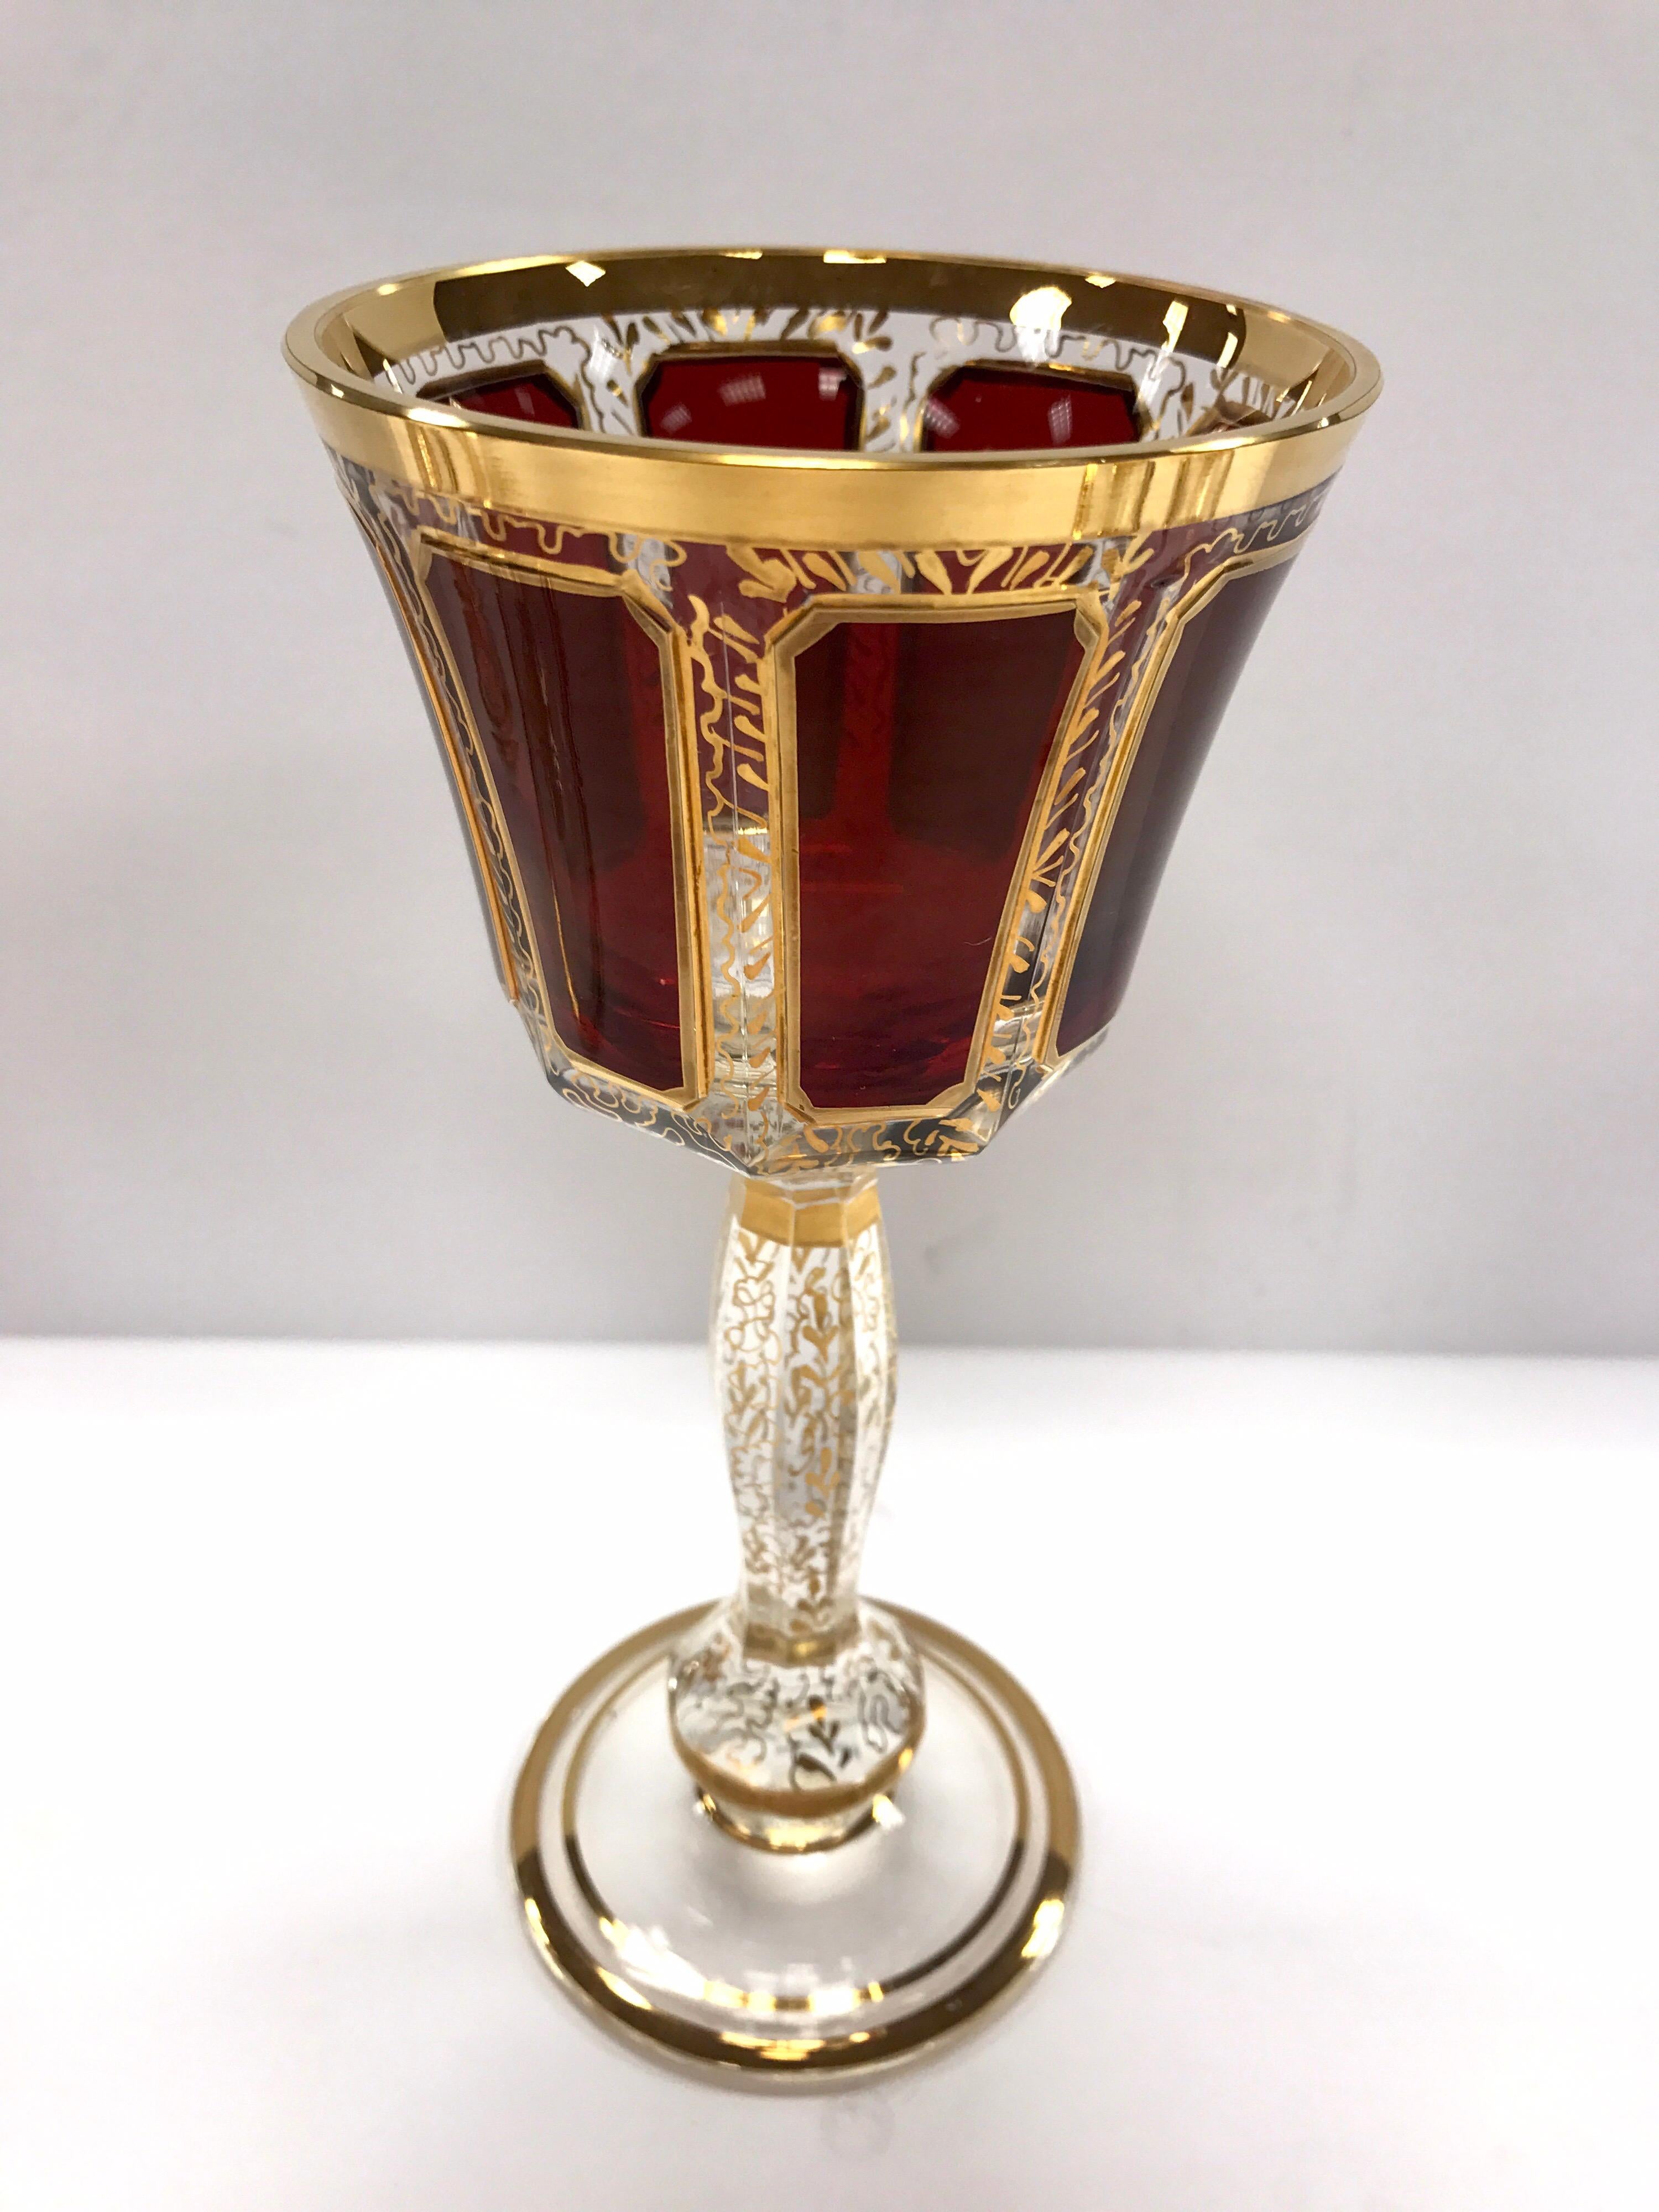 Pair of stunning burgundy red and gold Venetian glasses.